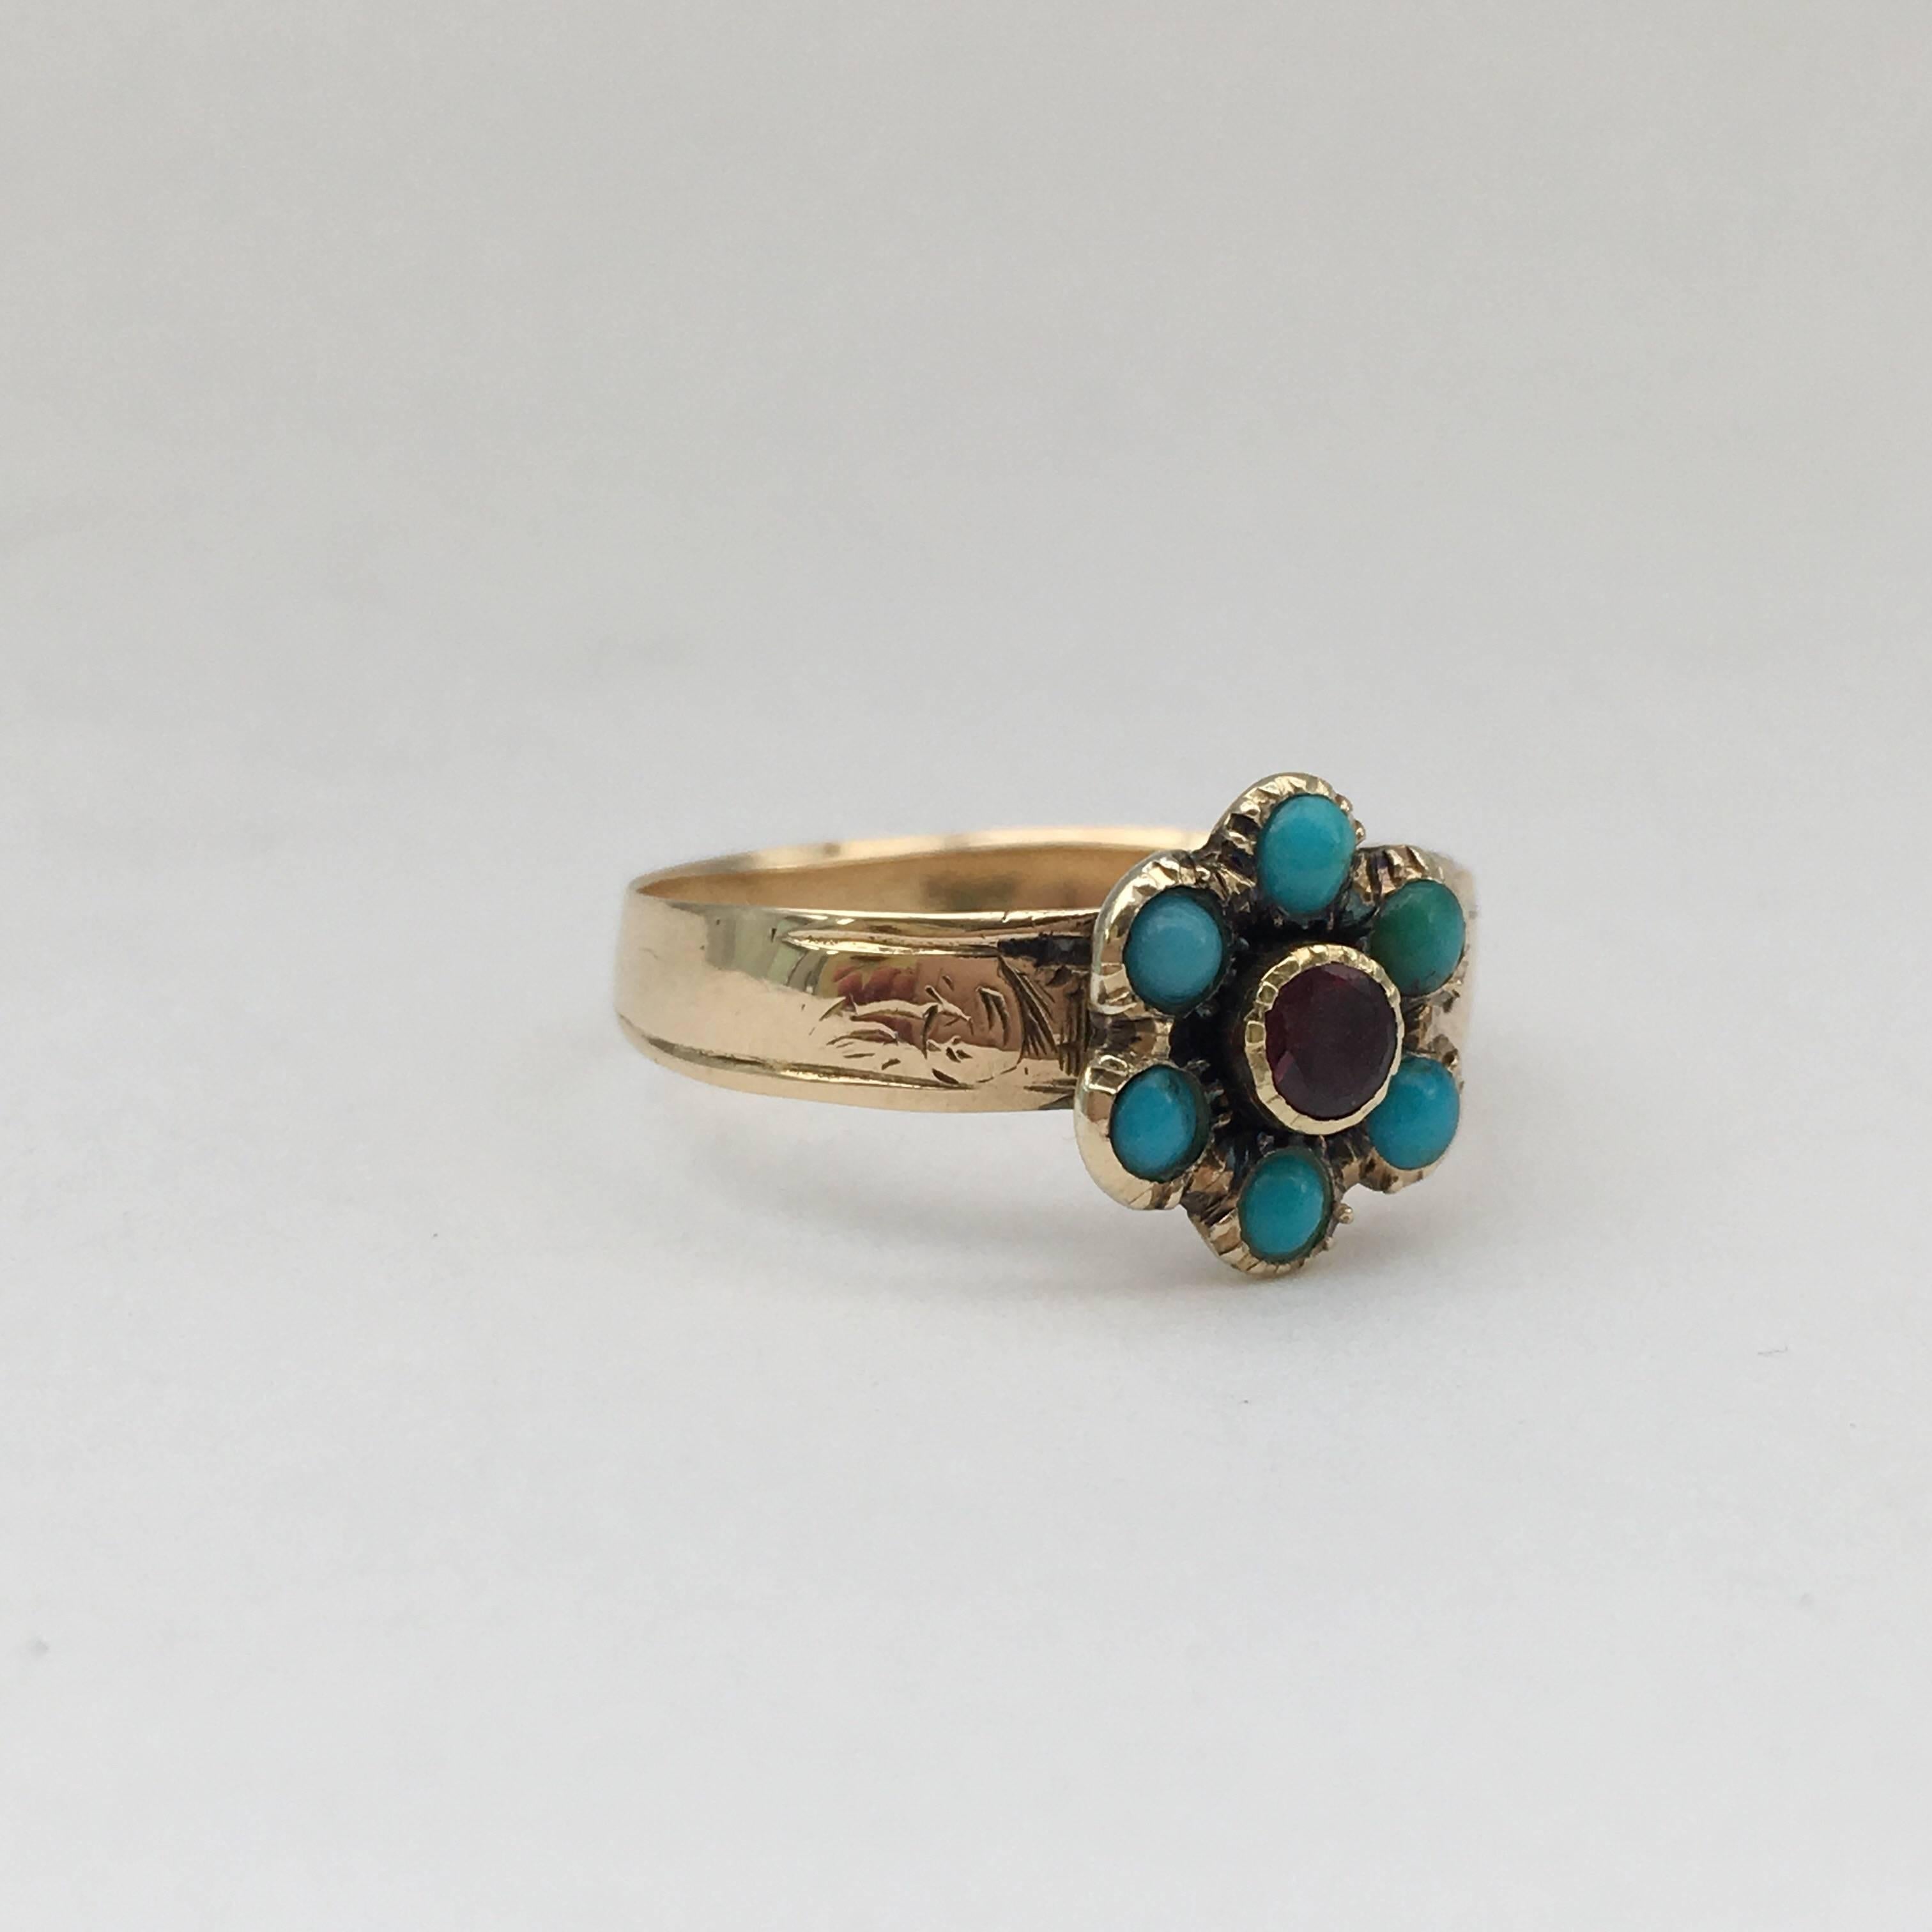 This pretty ring is full of romance and meaning. The buckle design of the band denotes eternity, loyalty, strength and protection, while the forget-me-knot flower is a message of love and remembrance. Garnet is also the stone that celebrates the